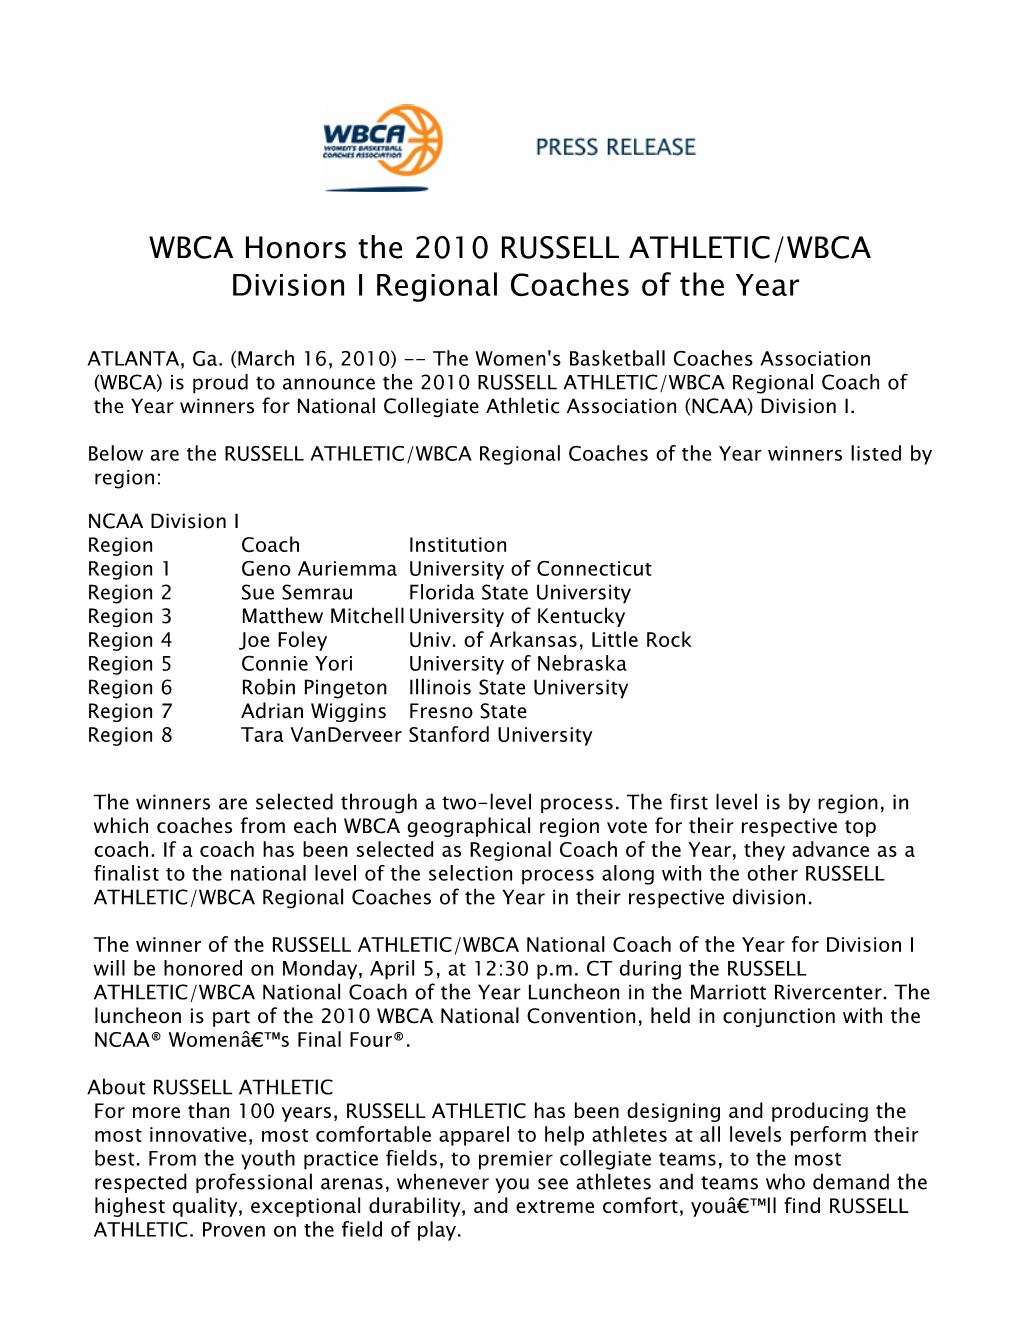 WBCA Honors the 2010 RUSSELL ATHLETIC/WBCA Division I Regional Coaches of the Year